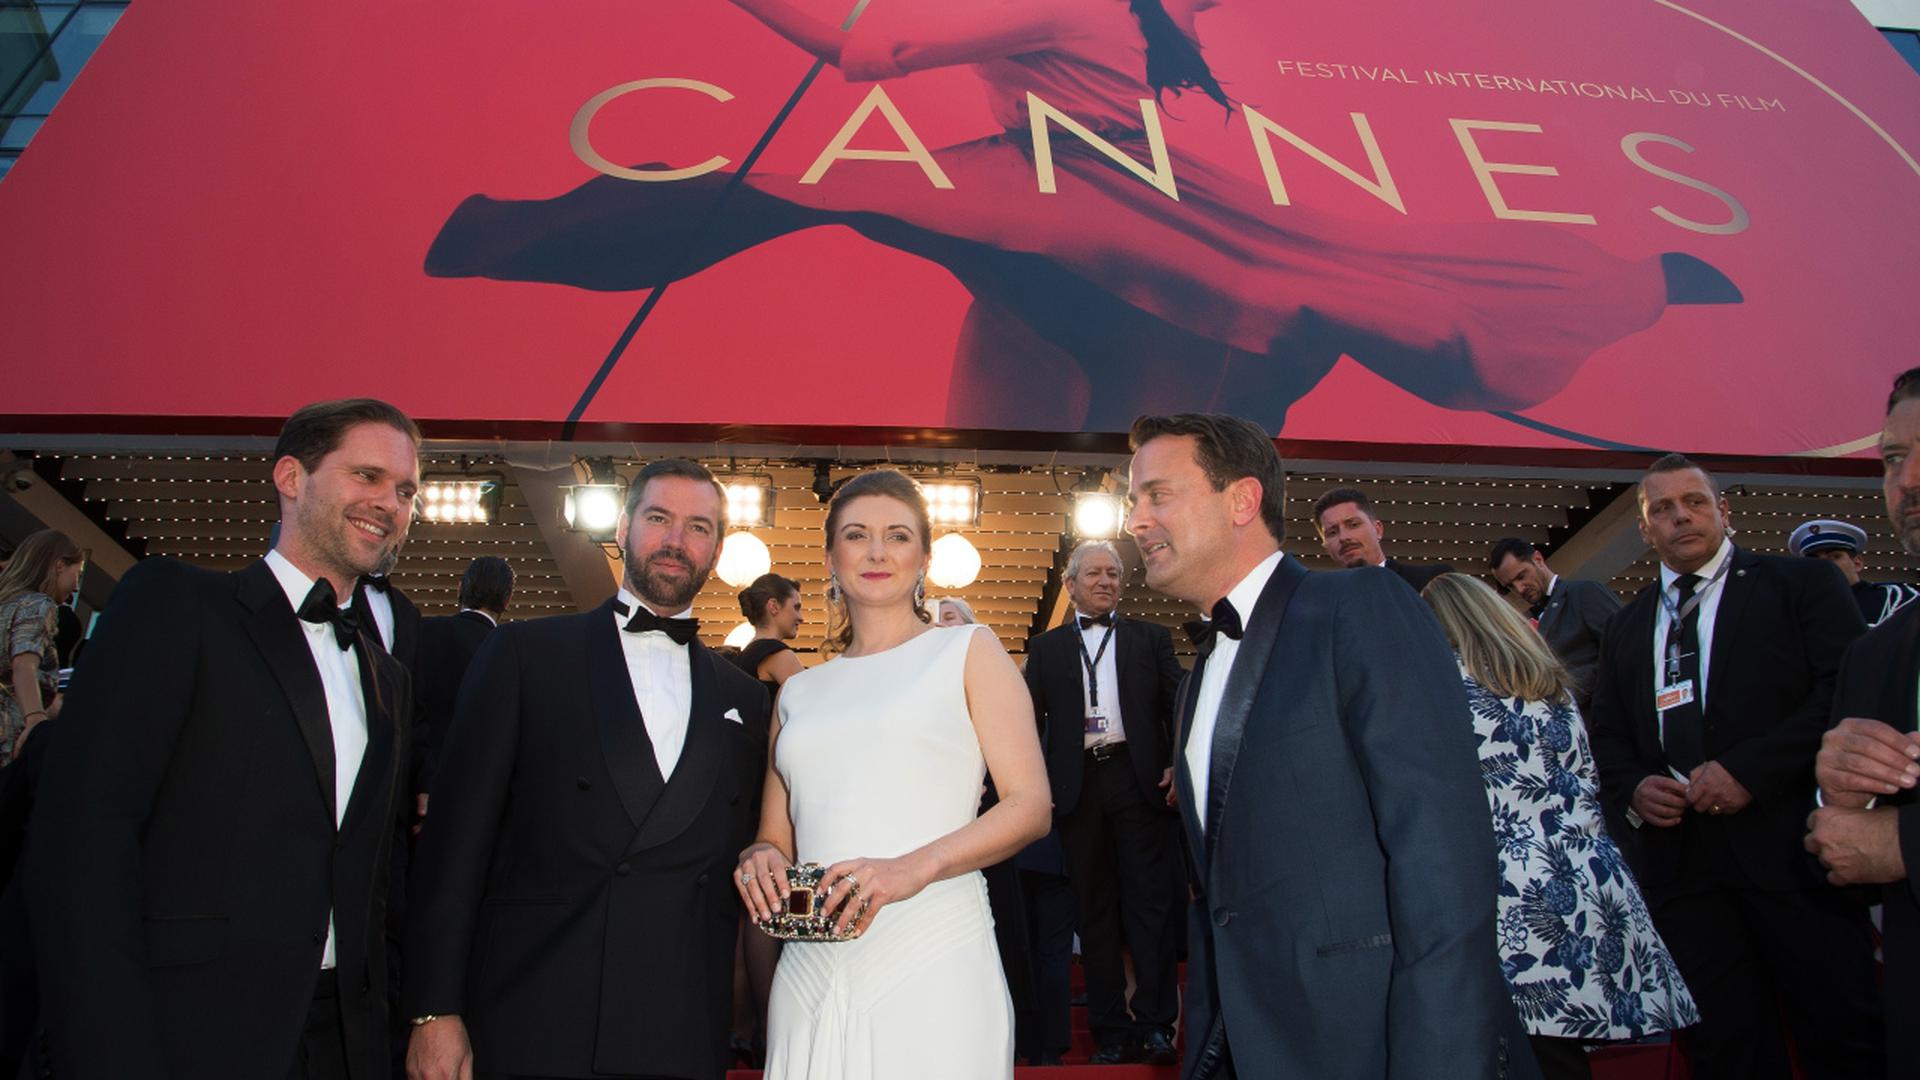 Their Royal Highnesses, Prince Guillaume, Grand Duke of Luxembourg, Princess Stephanie, Grand Duke of Luxembourg, Prime Minister of Luxembourg, Xavier Bettel and Gauthier Destiny attend at the opening ceremony for the screening of the film "Les fantomes d'Ismael" (Ismael's Ghosts) out of competition at the 70th Cannes Film Festival of Cannes on May 16, 2017 in Cannes, France. 

